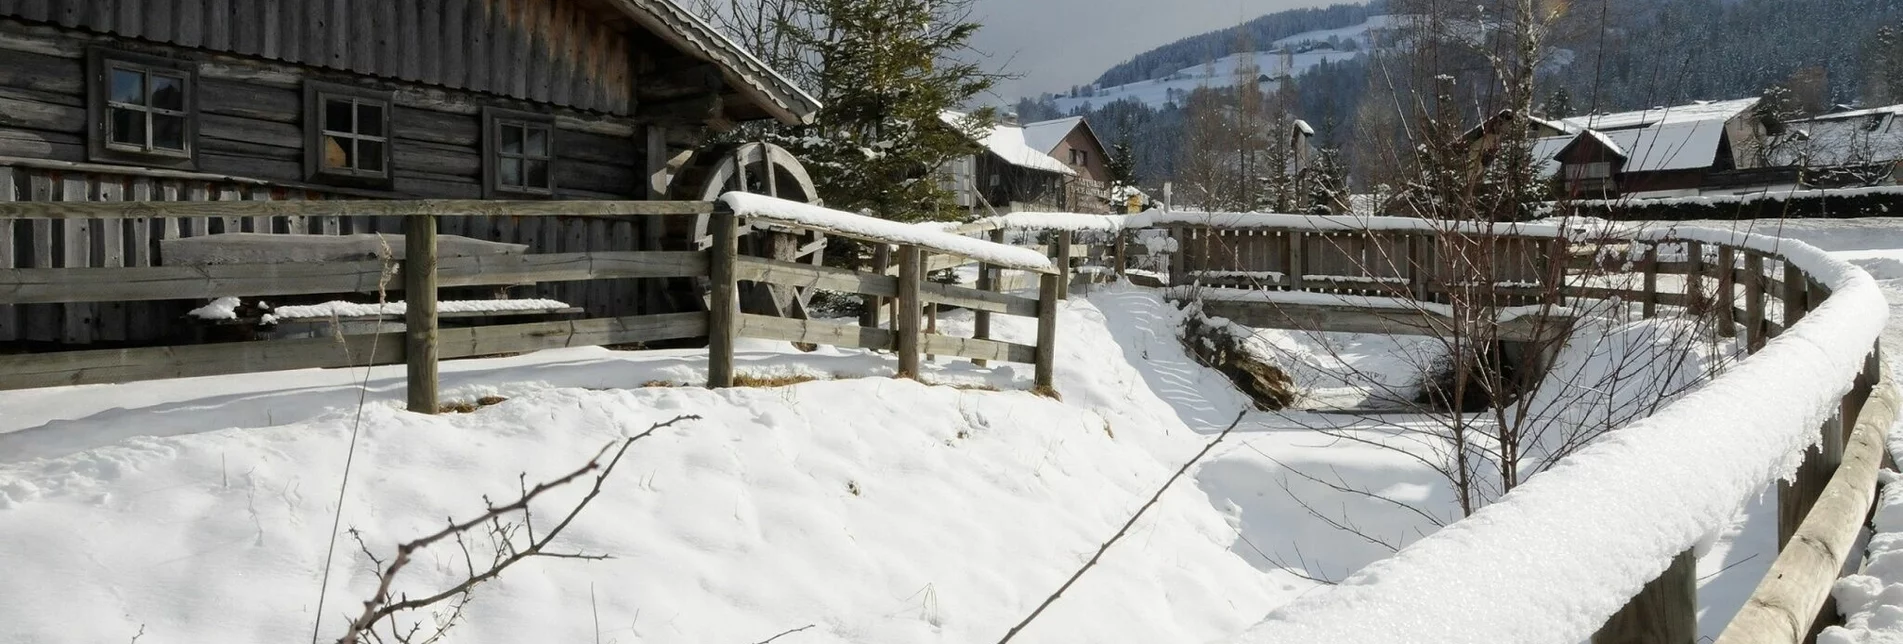 Winter Hiking Villages and hike in the Enns Valley - Touren-Impression #1 | © © www.haus.at